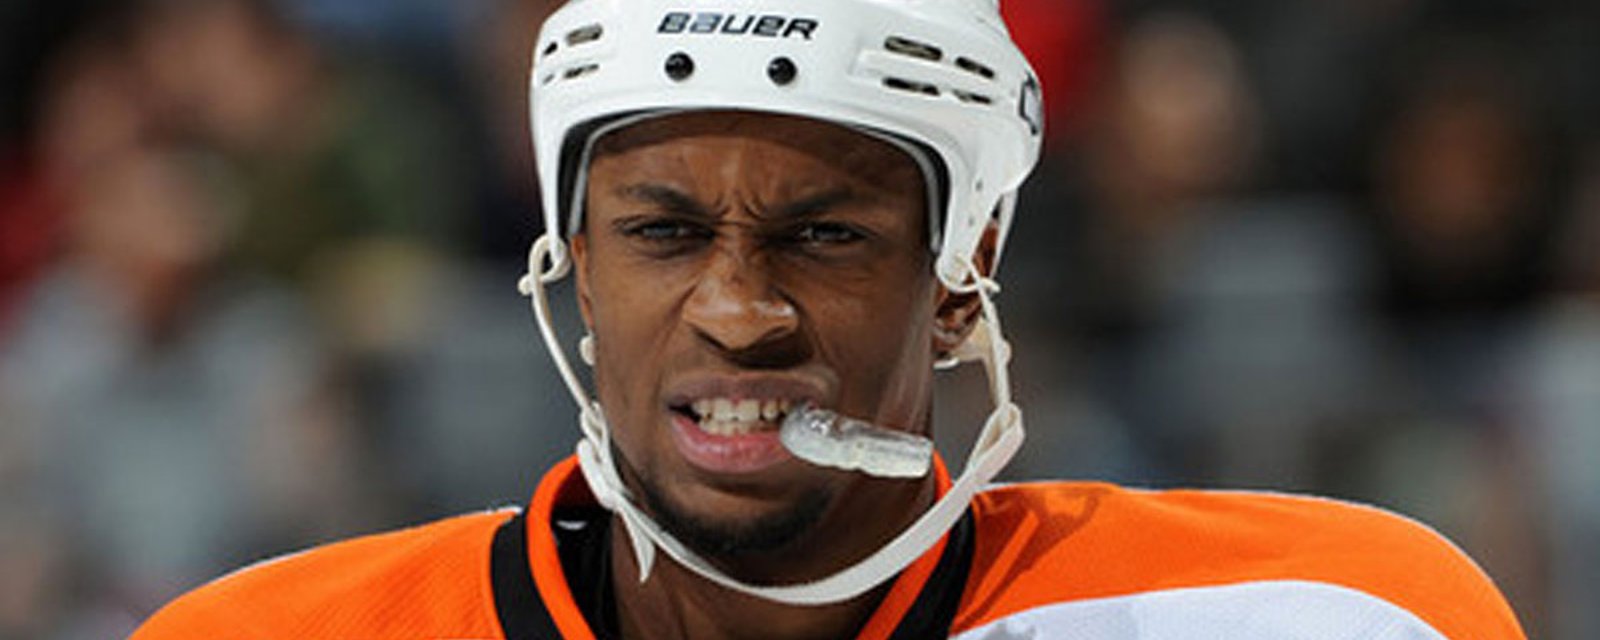 Injury Report: Flyers issue update on Simmonds